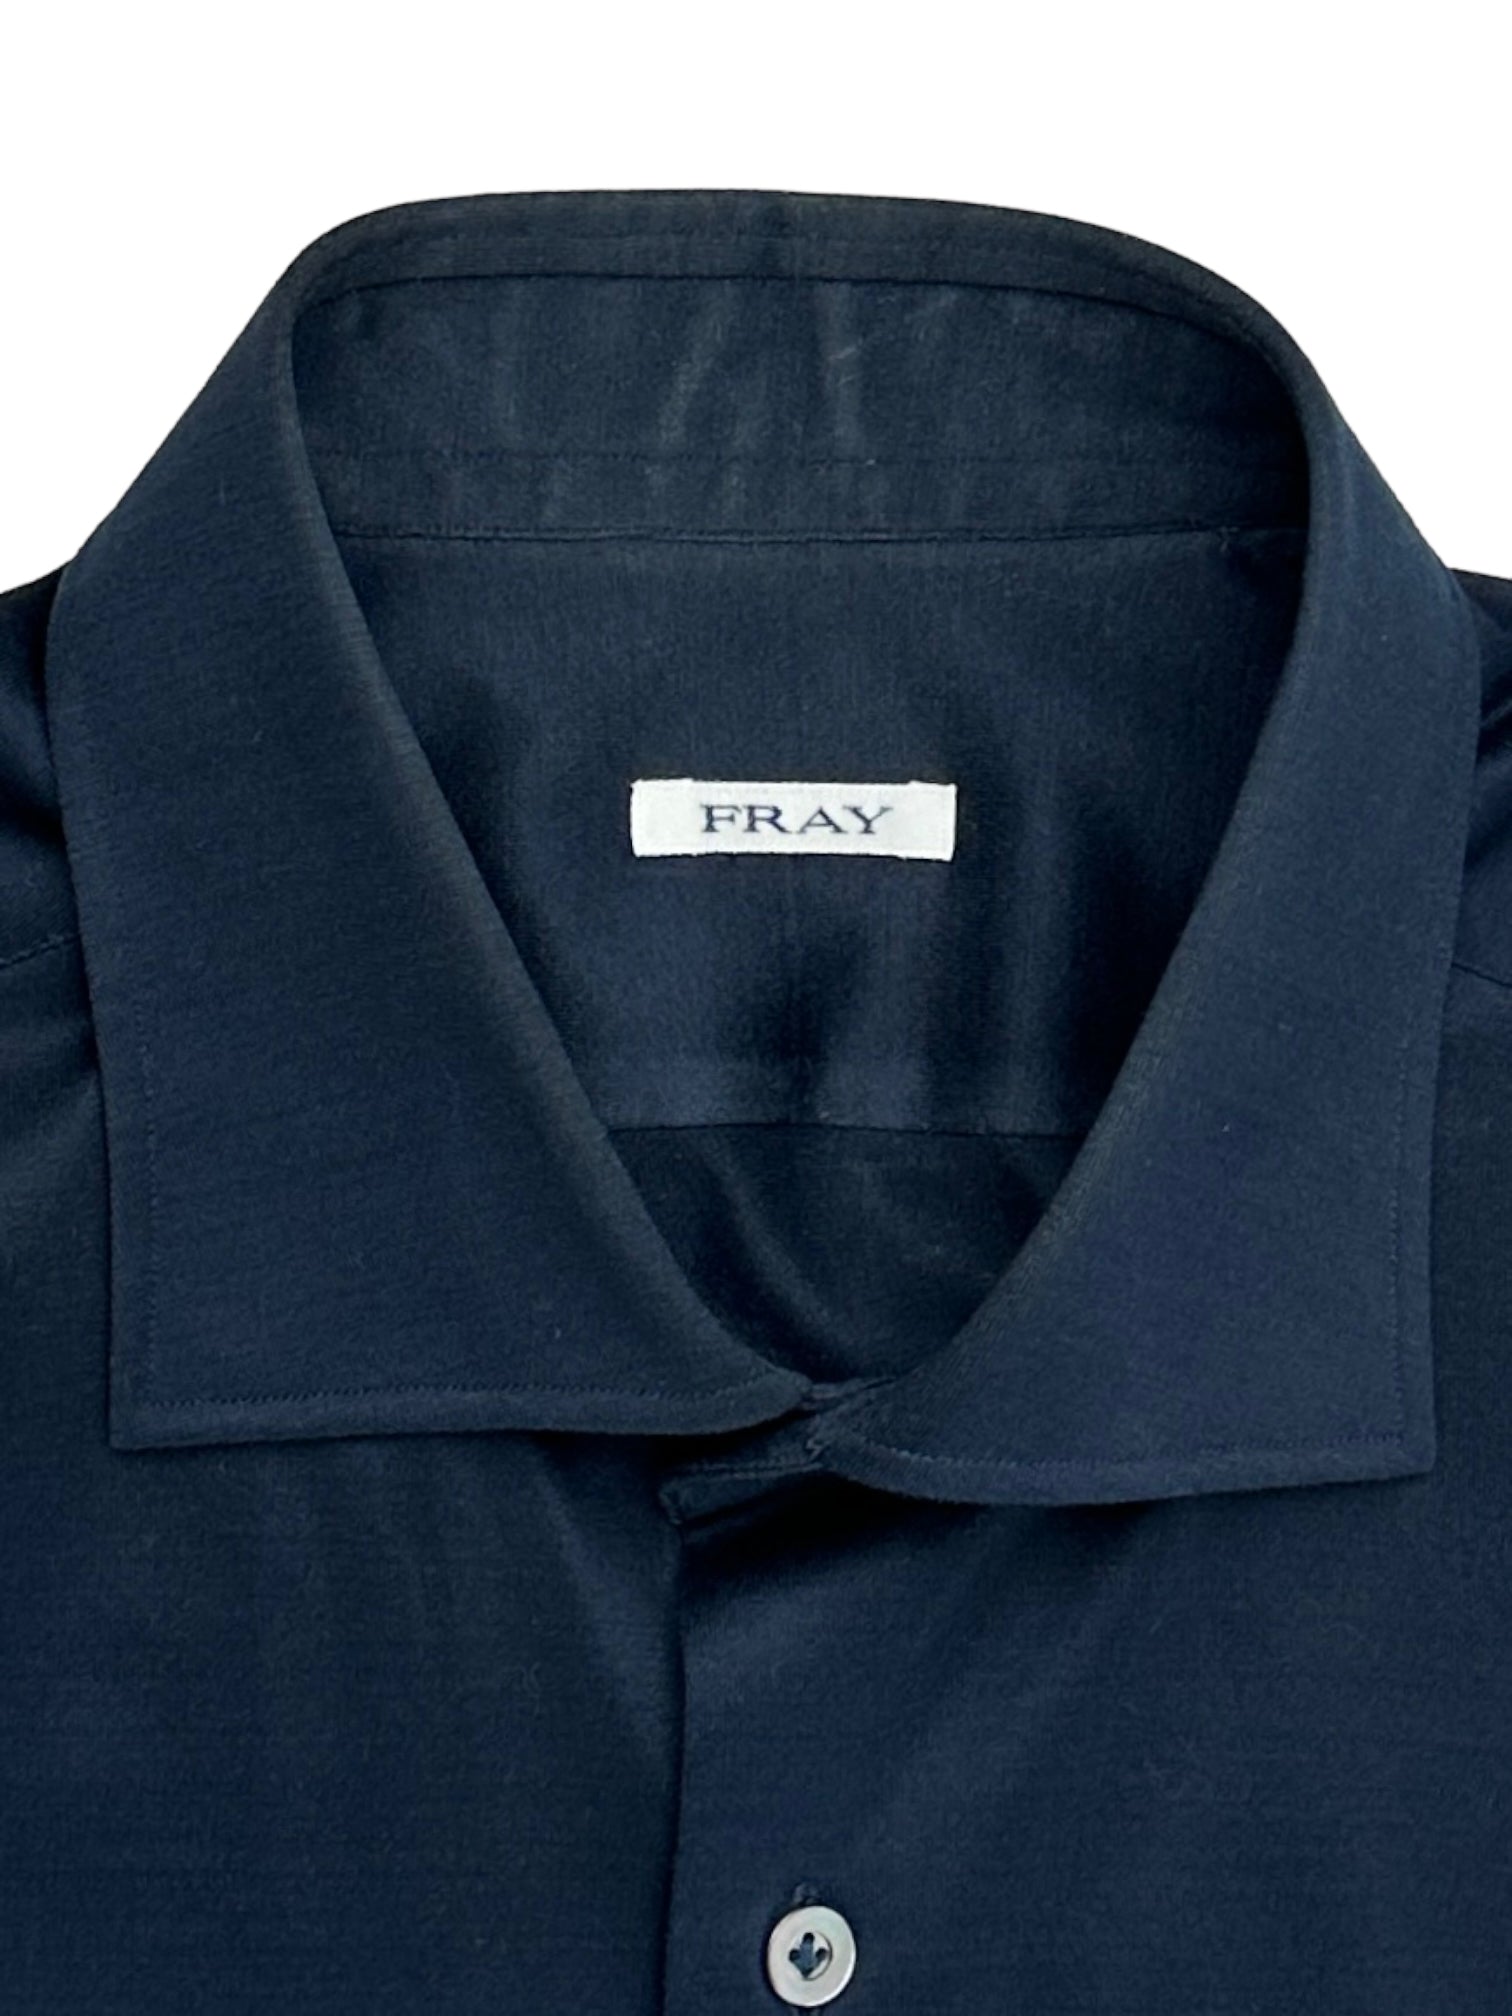 Fray Navy Jersey Knitted Shirt